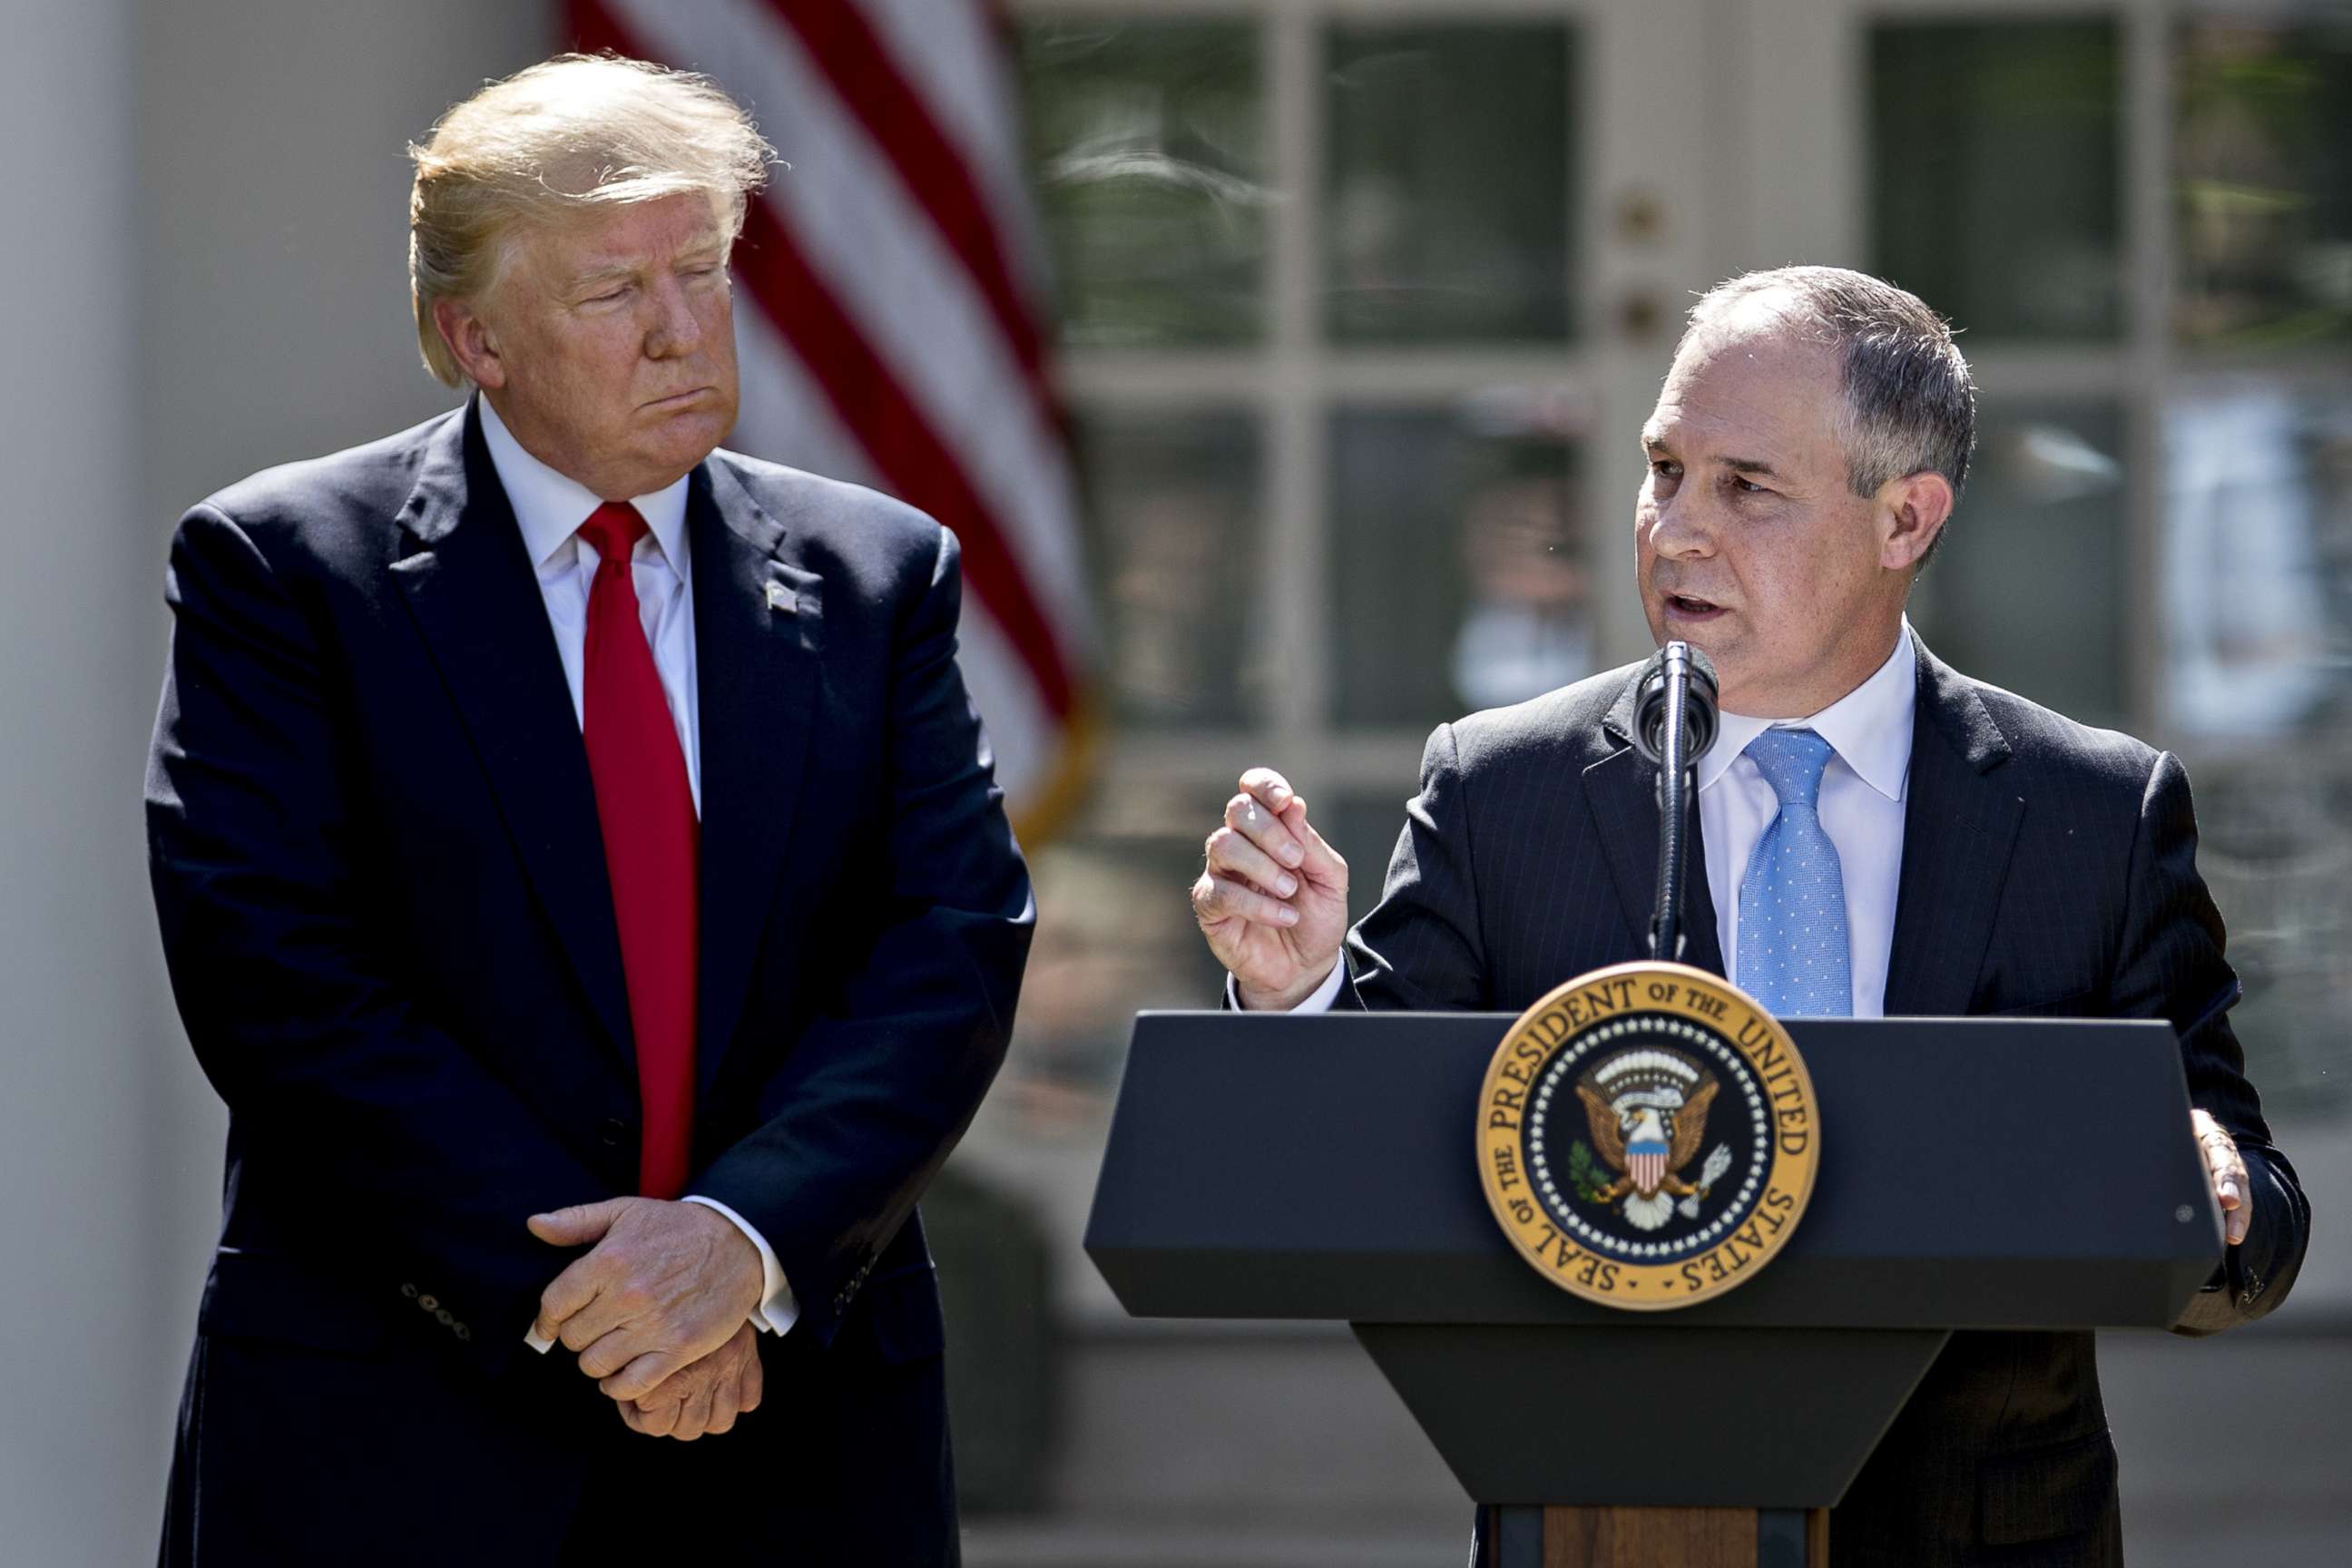 PHOTO: Scott Pruitt, administrator of the Environmental Protection Agency (EPA), speaks as President Donald Trump, left, listens during an announcement in the Rose Garden of the White House in Washington, D.C., June 1, 2017.